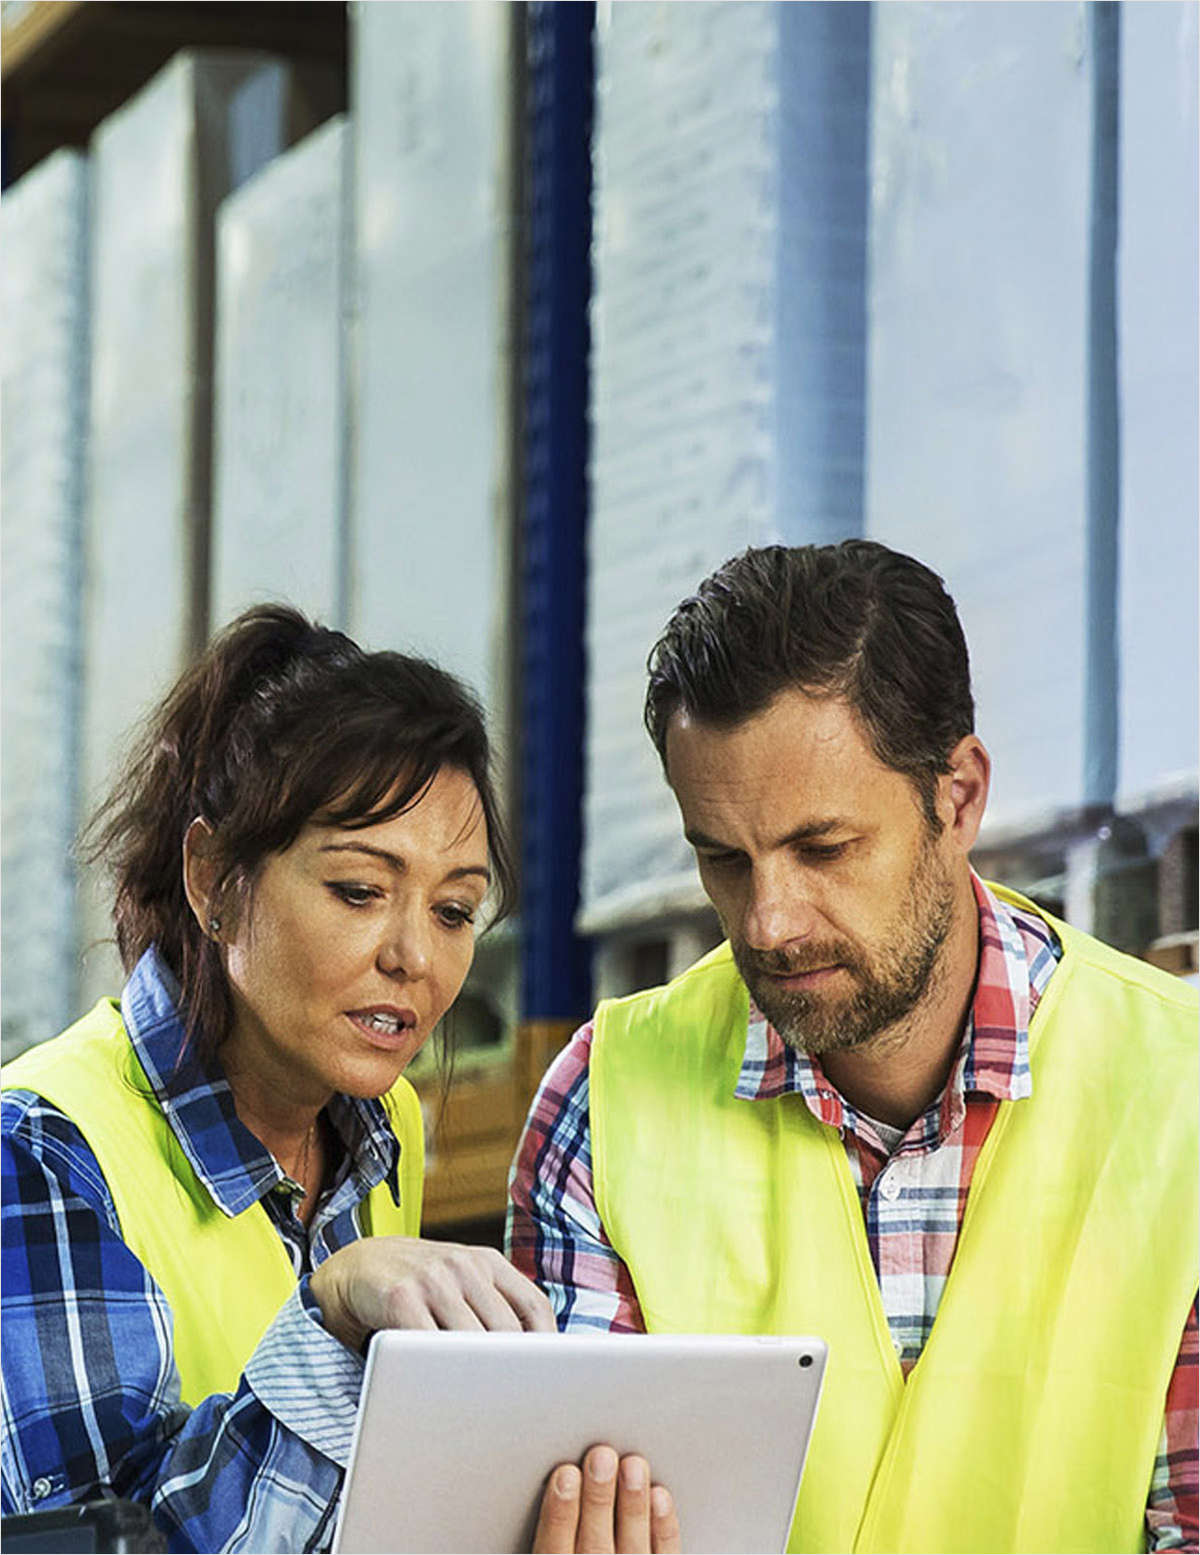 Optimize Retail Distribution and Fulfillment With Infor WMS